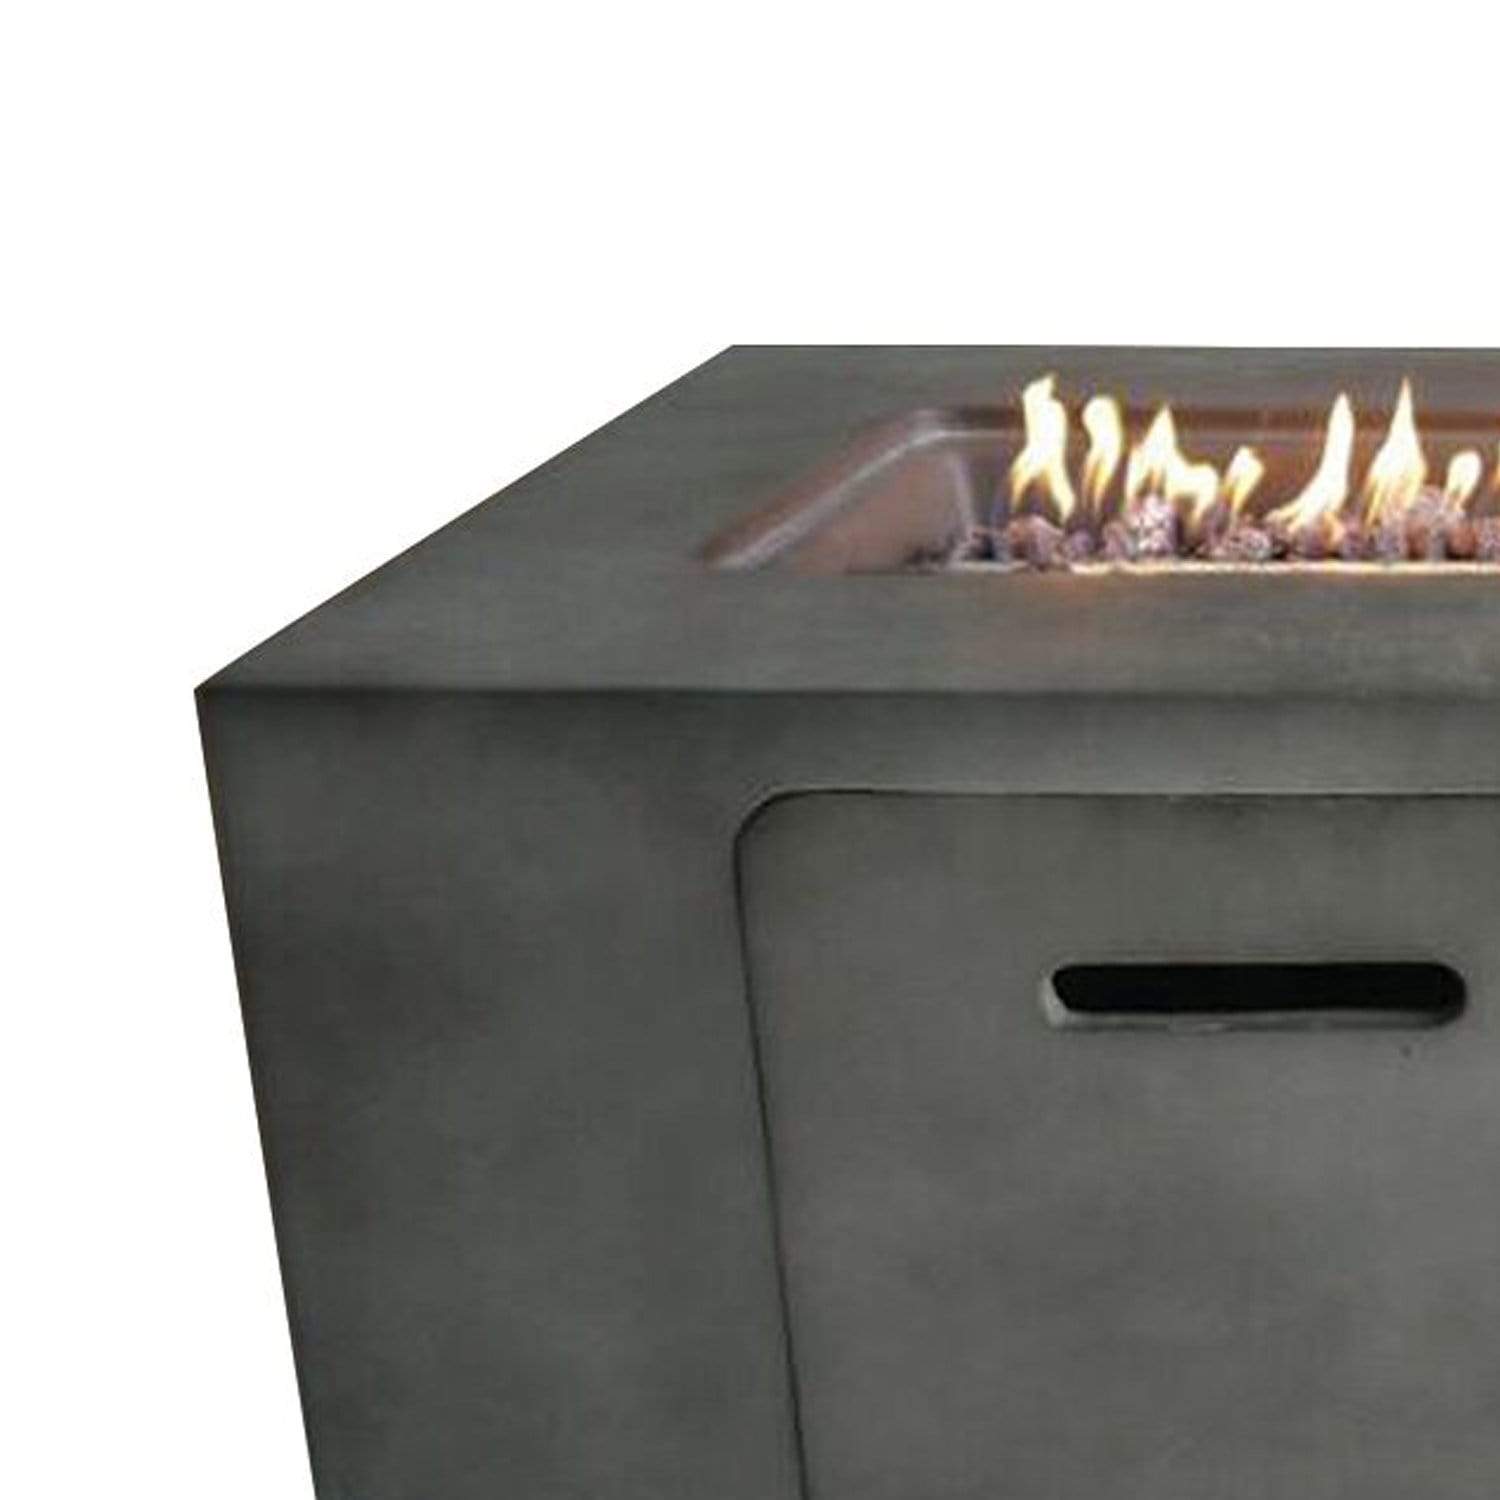 HomeRoots Outdoors Outdoor Furniture > Fire Pits Gray / MGO and Metal Rectangular Cement Gas Fire Pit with Lava Rocks and Control Panel,Gray